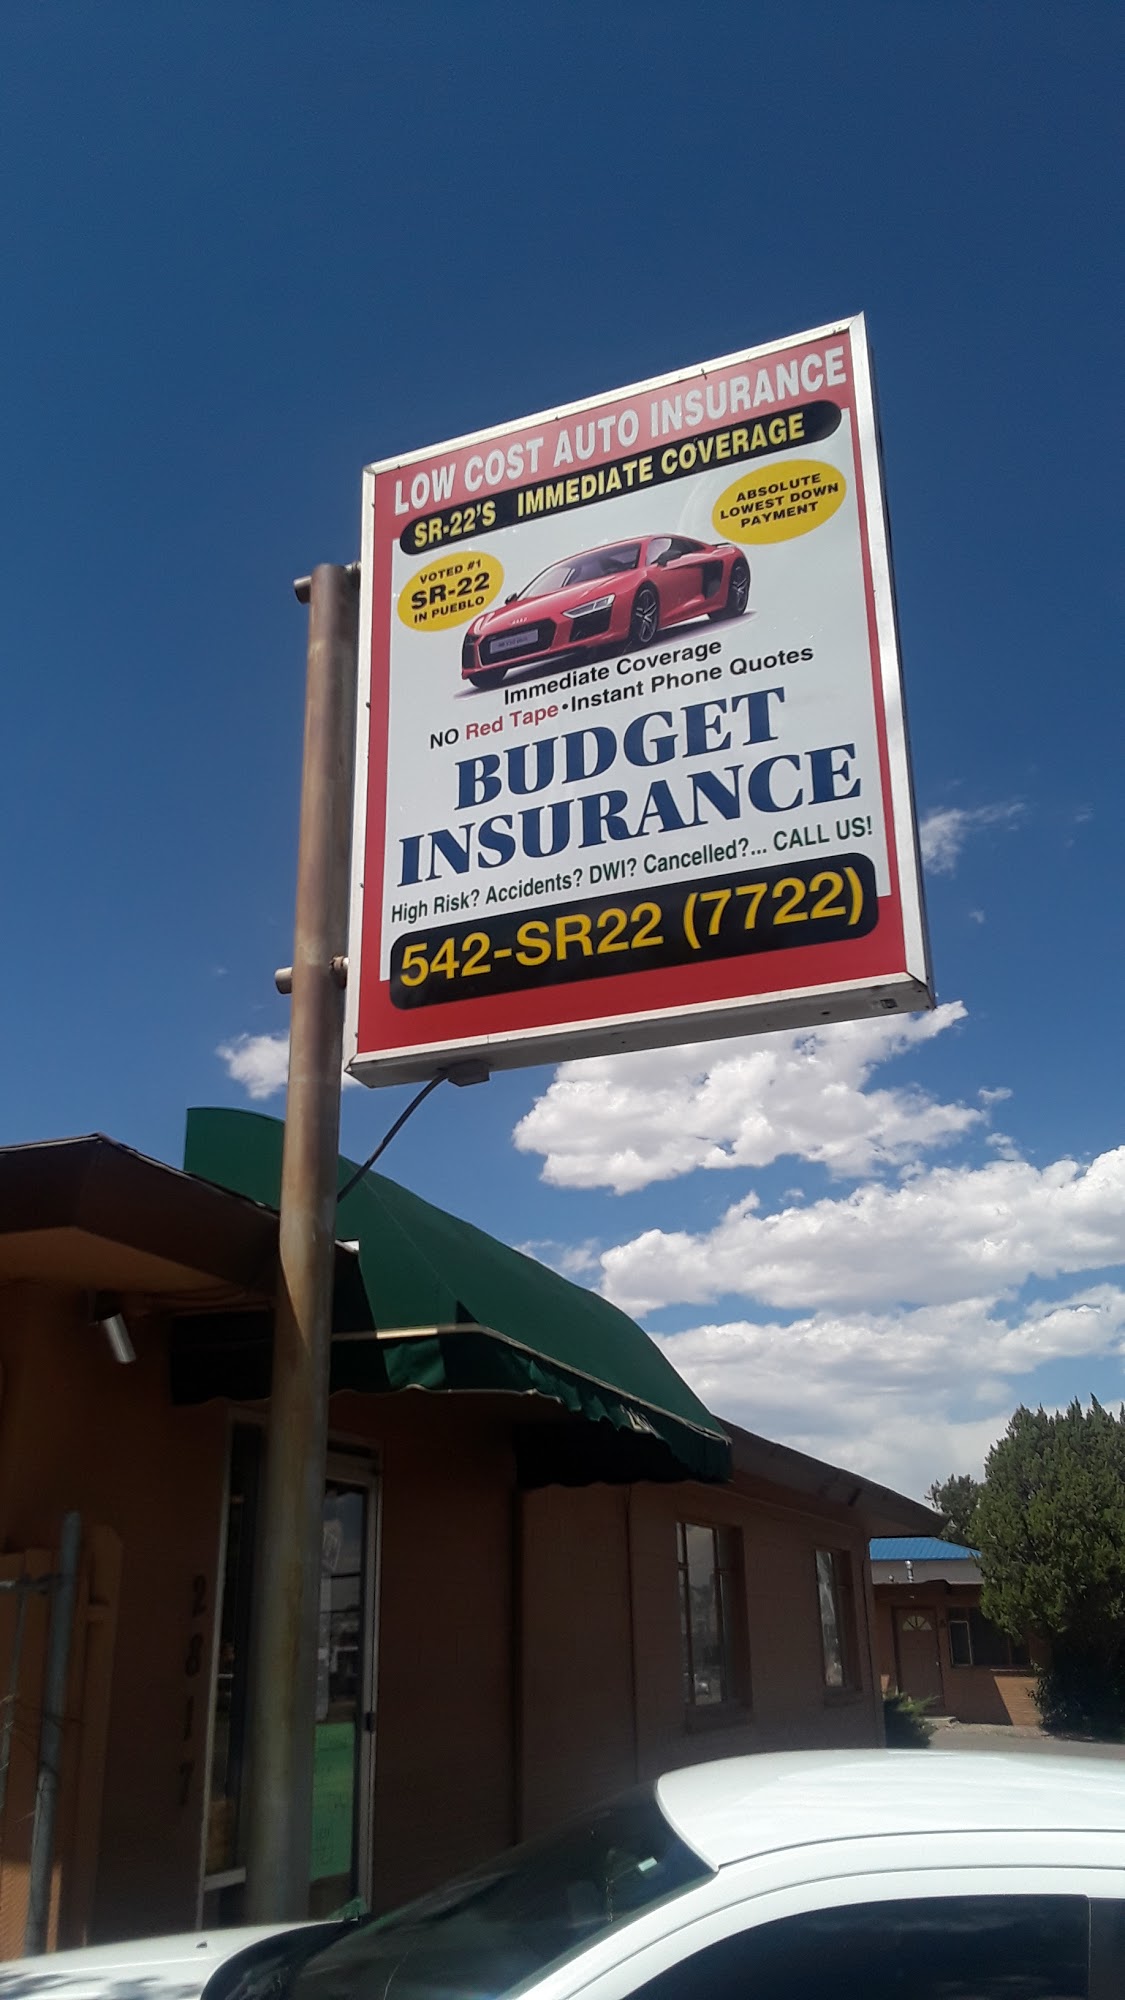 Budget Insurance Services